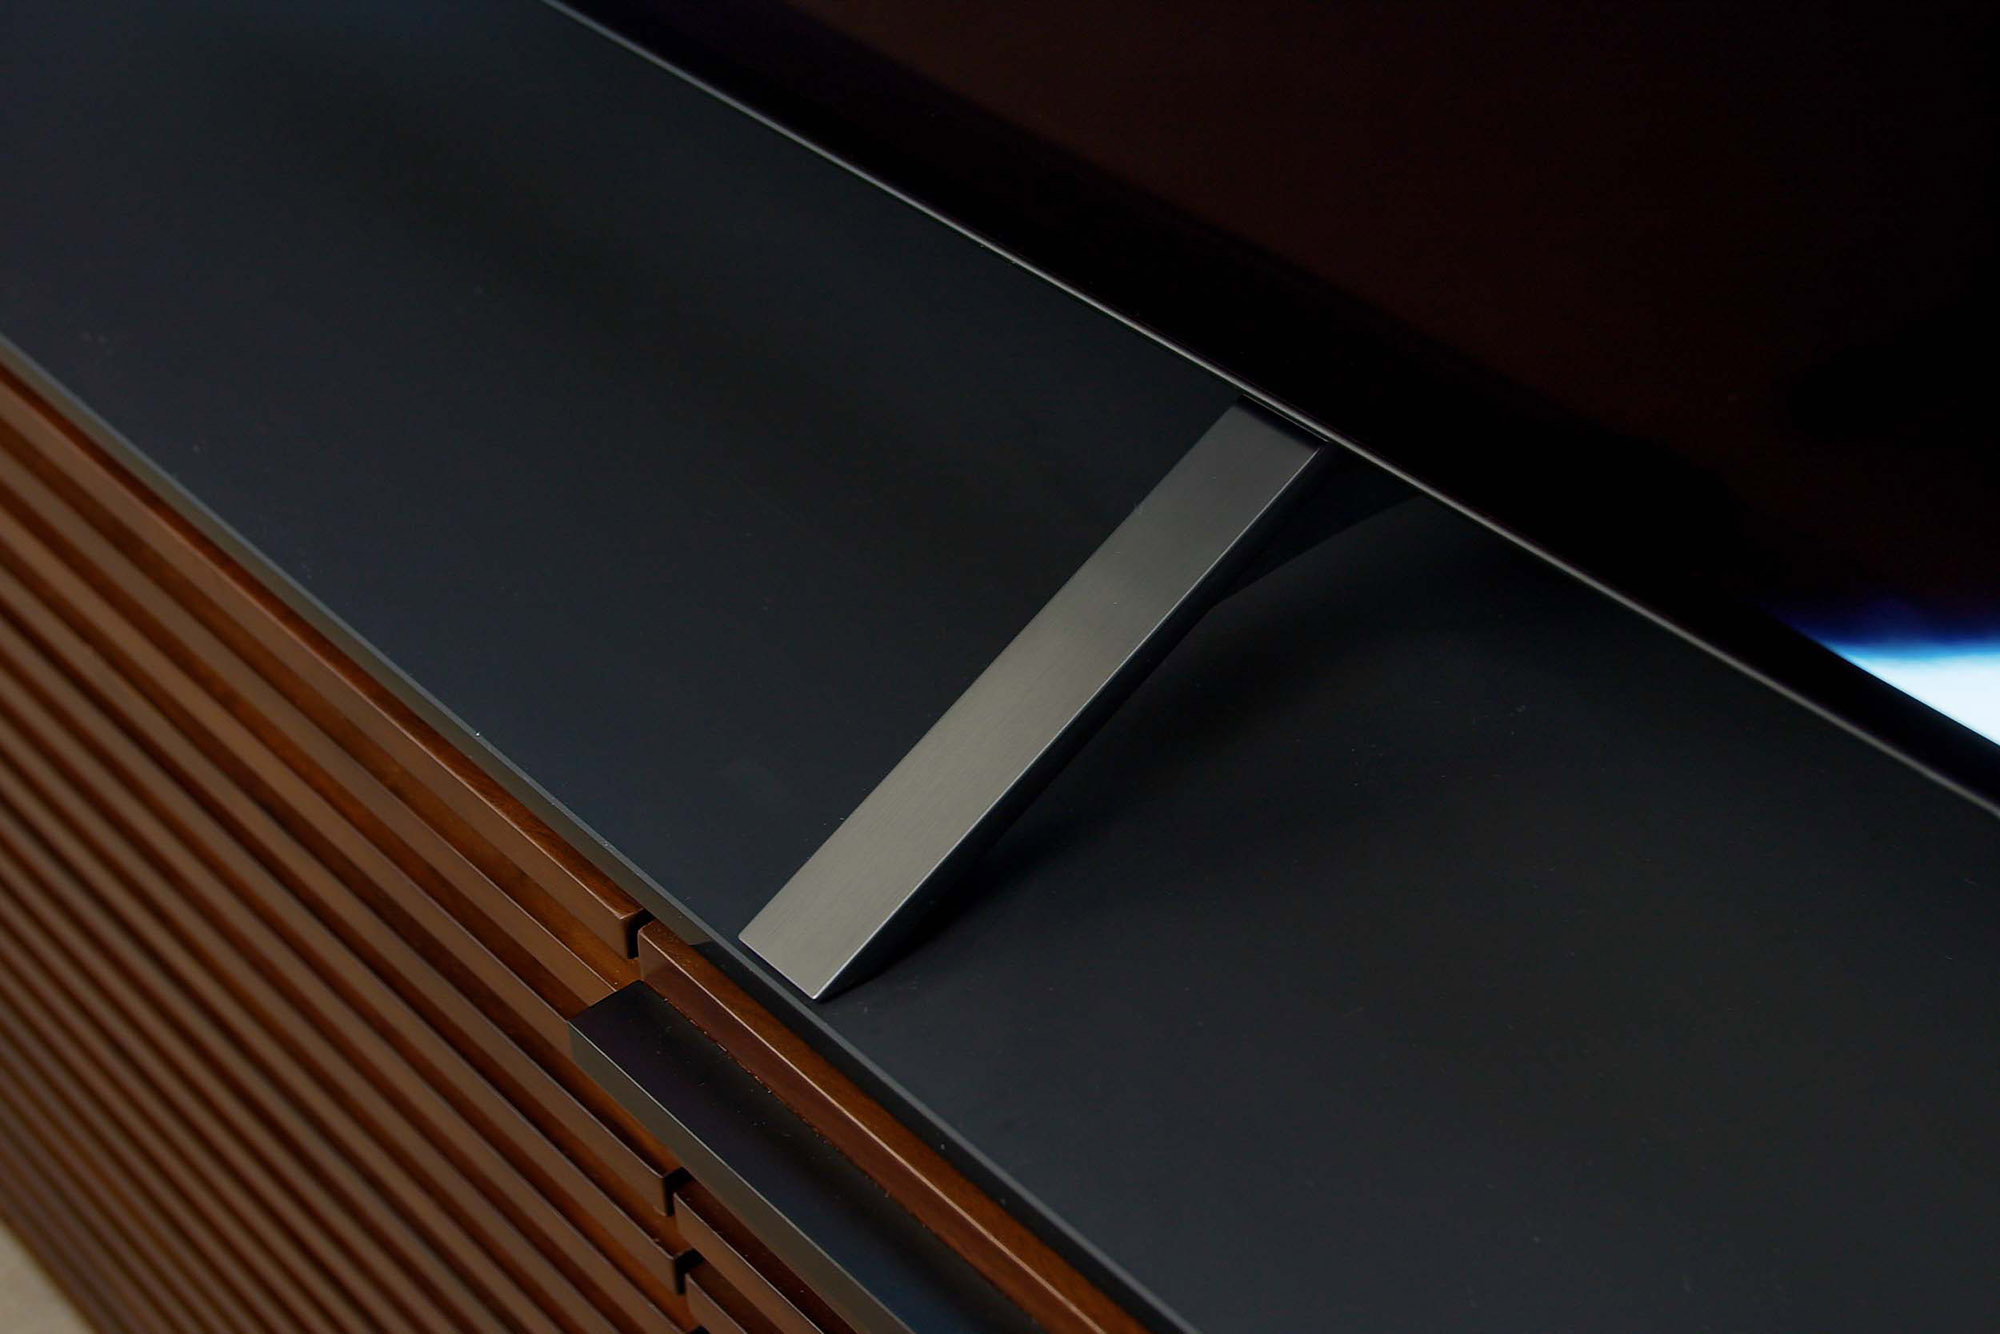 Close up image of the LG A1 OLED 4K HDR TV's stand